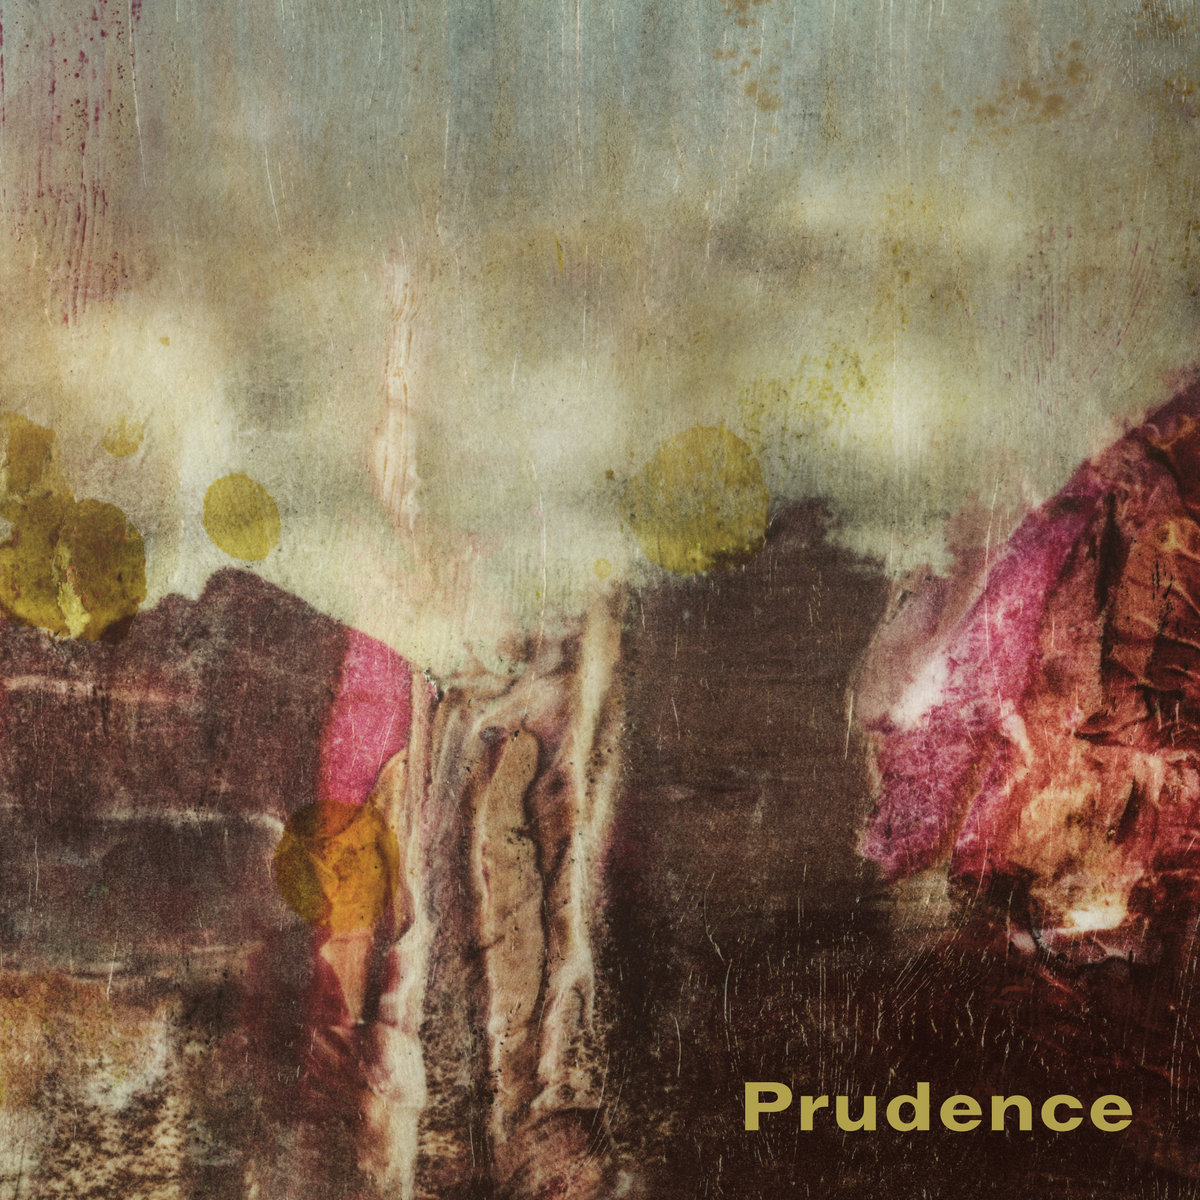 Prudence untitled album cover - abstract photo in browns, pinks and yellows